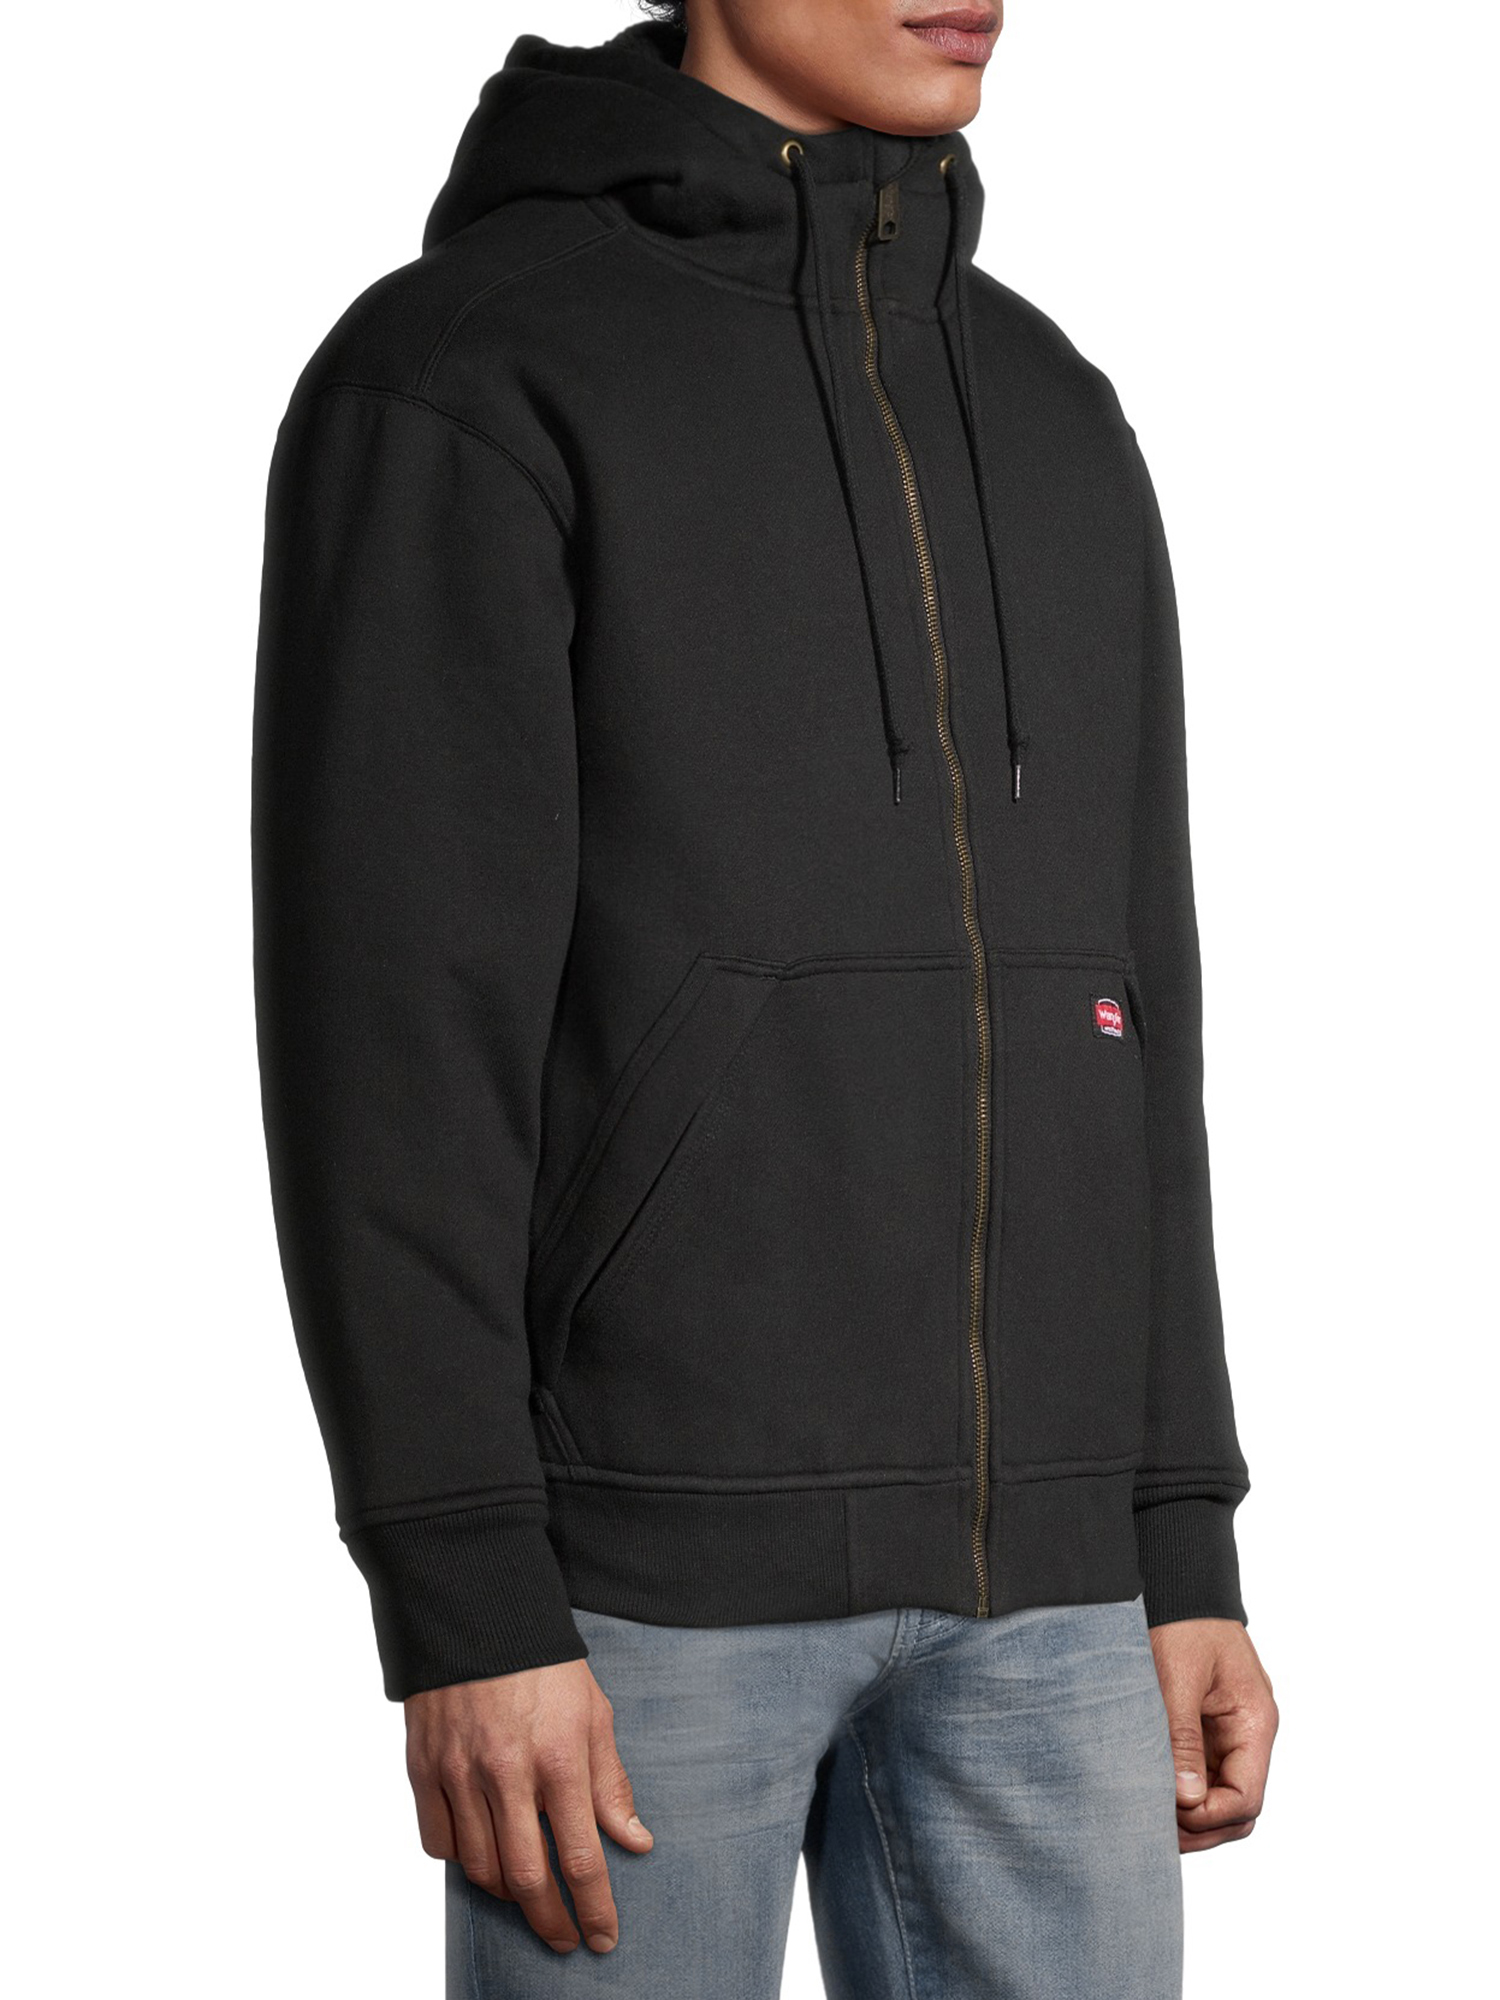 Wrangler Workwear Men's Guardian Heavy Weight Faux Sherpa and Quilt Lined Hoodie - image 3 of 5